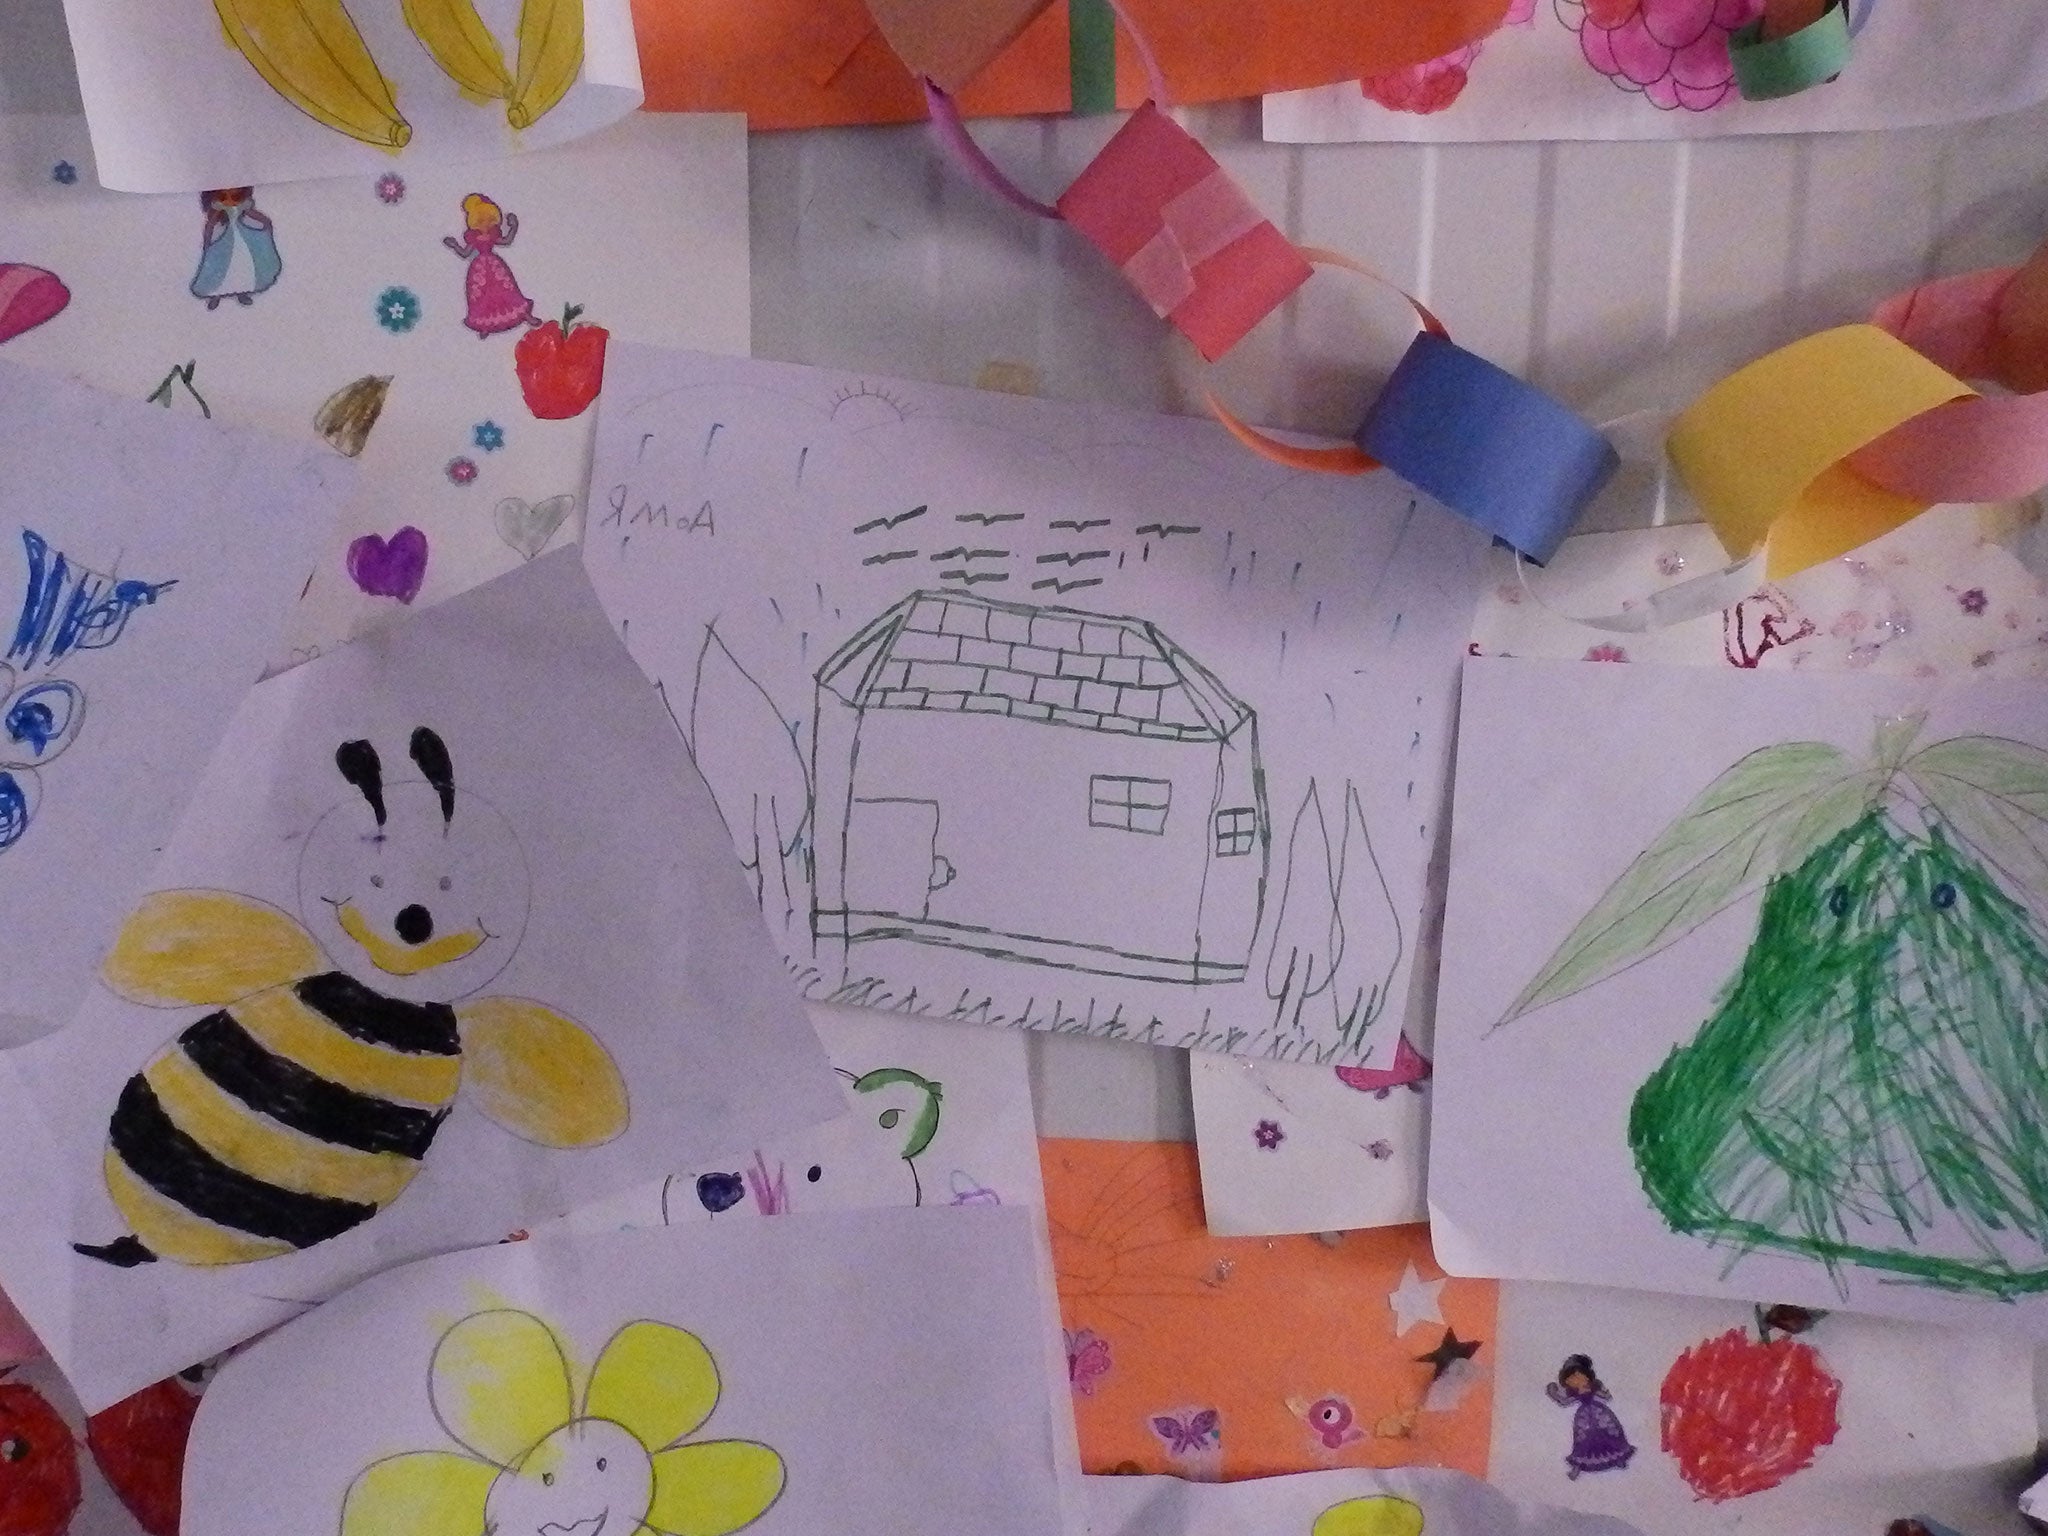 Houses can be seen among the pictures drawn by children at a centre run by Save the Children at Kara Tepe refugee camp, Lesbos, in November 2015